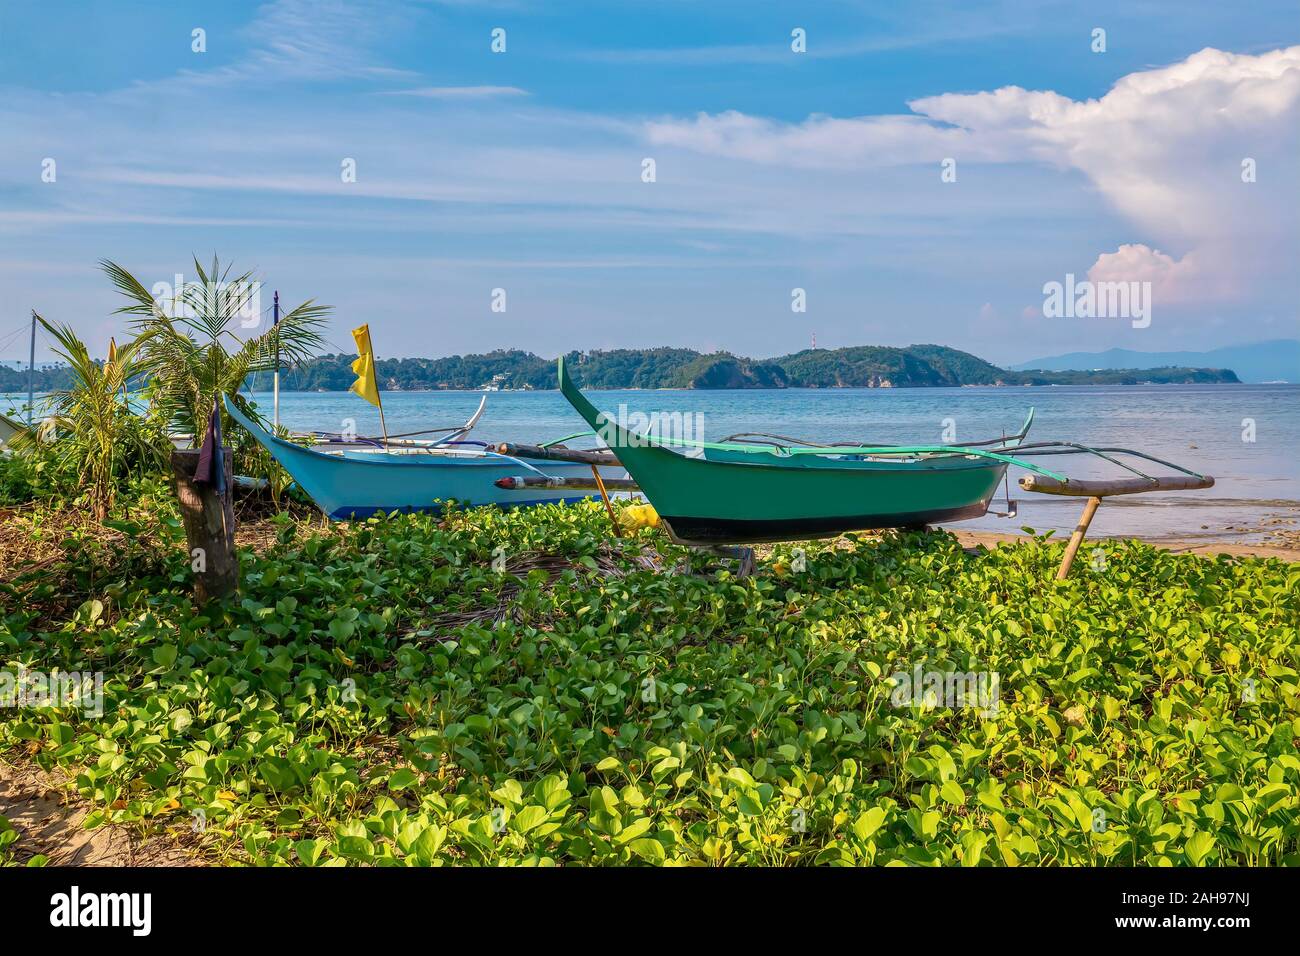 A picturesque scene on a tropical island in the Philippines, as small wooden outrigger fishing boats are pulled up onto a beach, which has vegetation. Stock Photo